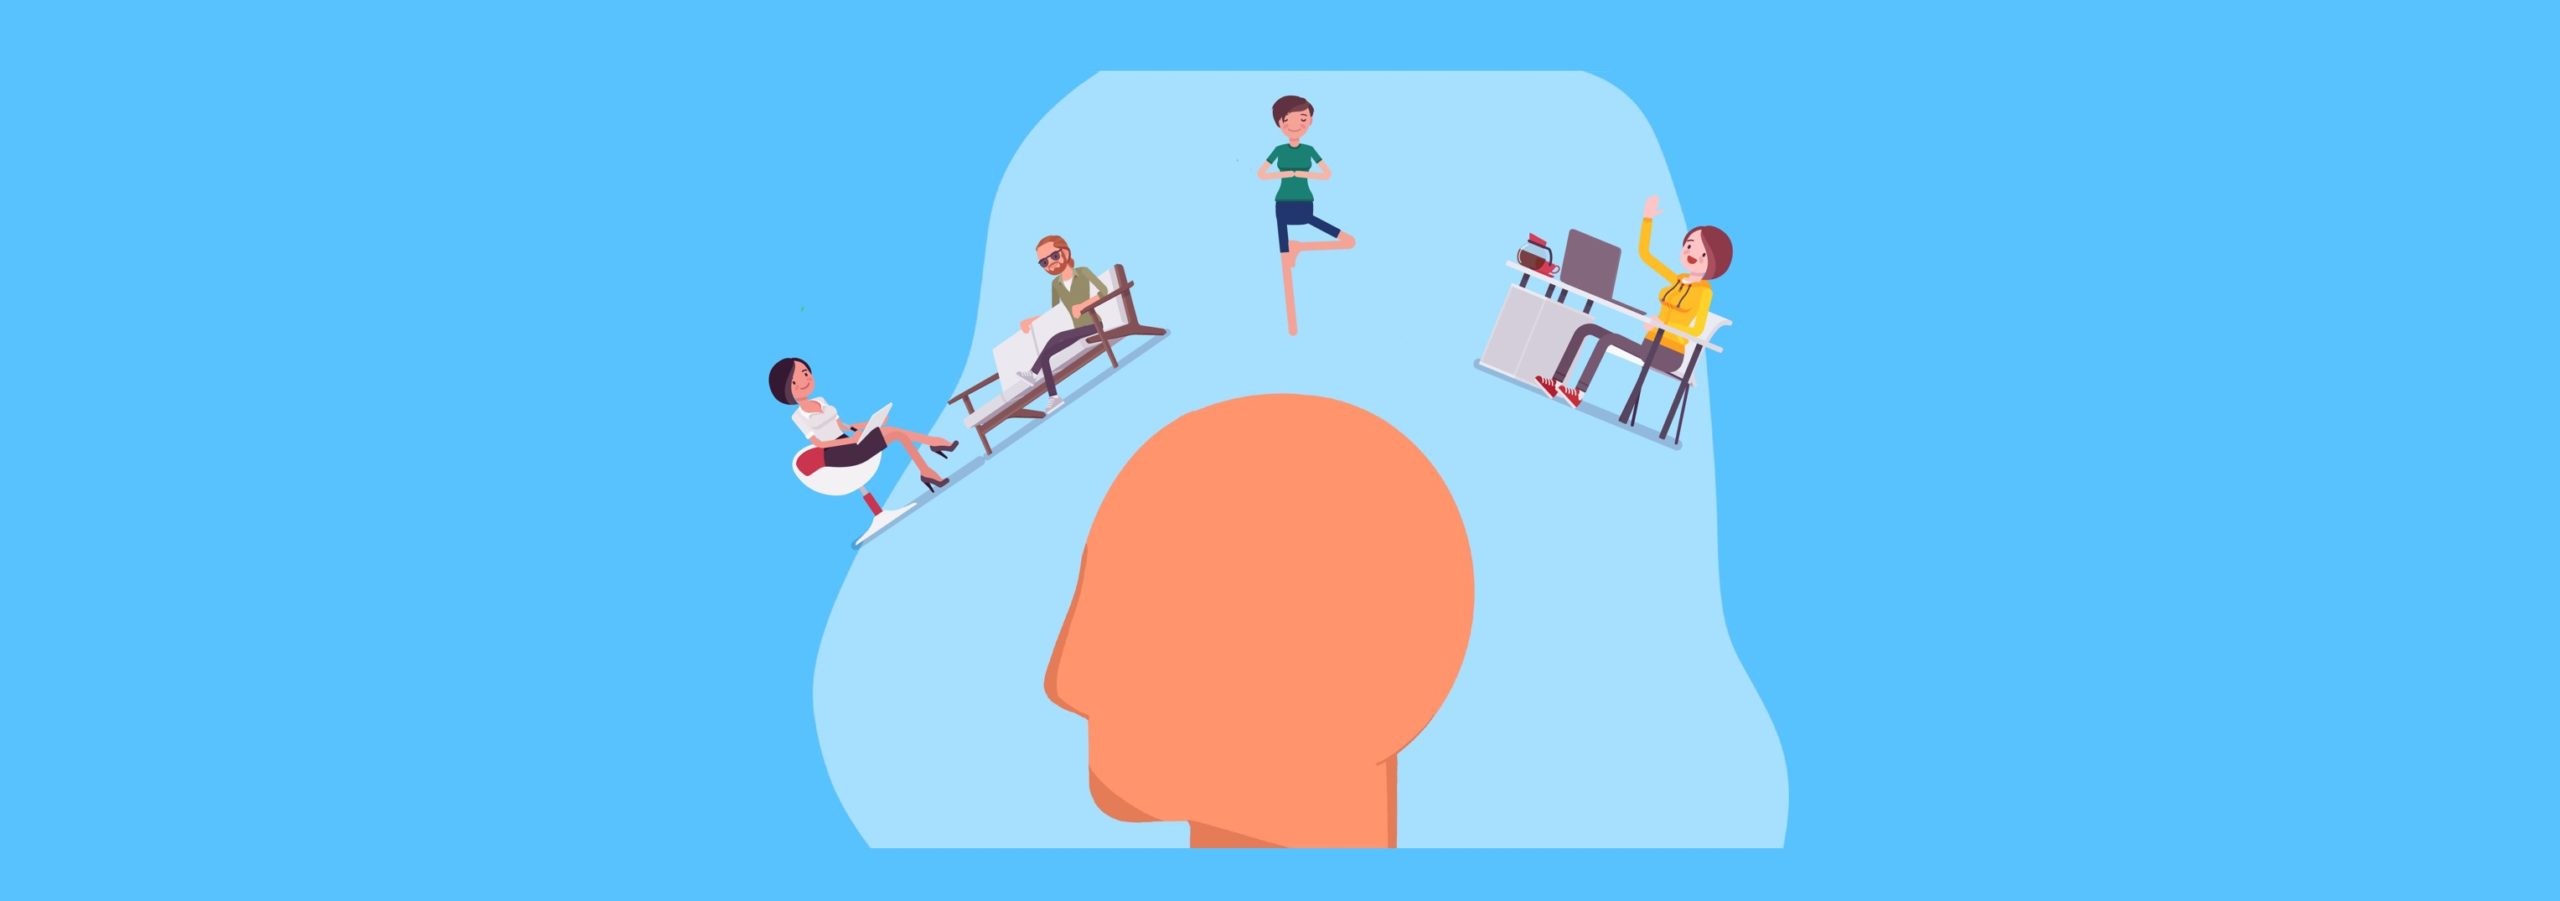 A face in the centre. To the top left of the face is a student getting face-to-face support. To the right is a student getting support via a laptop. In the middle is a person in a yoga pose.